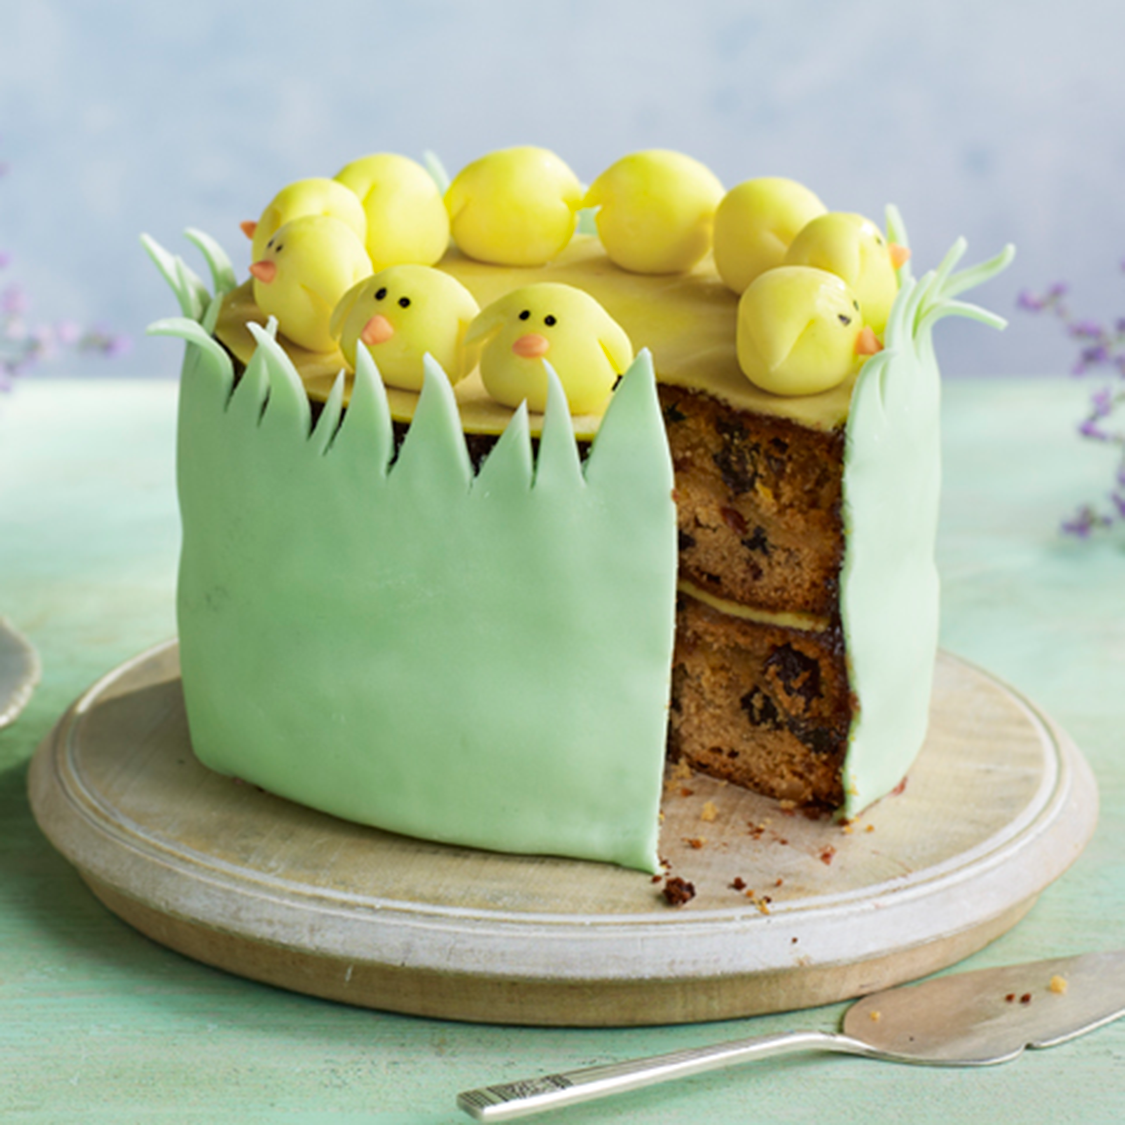 Easter Recipe: Simnel Cake - Dragons and Fairy Dust